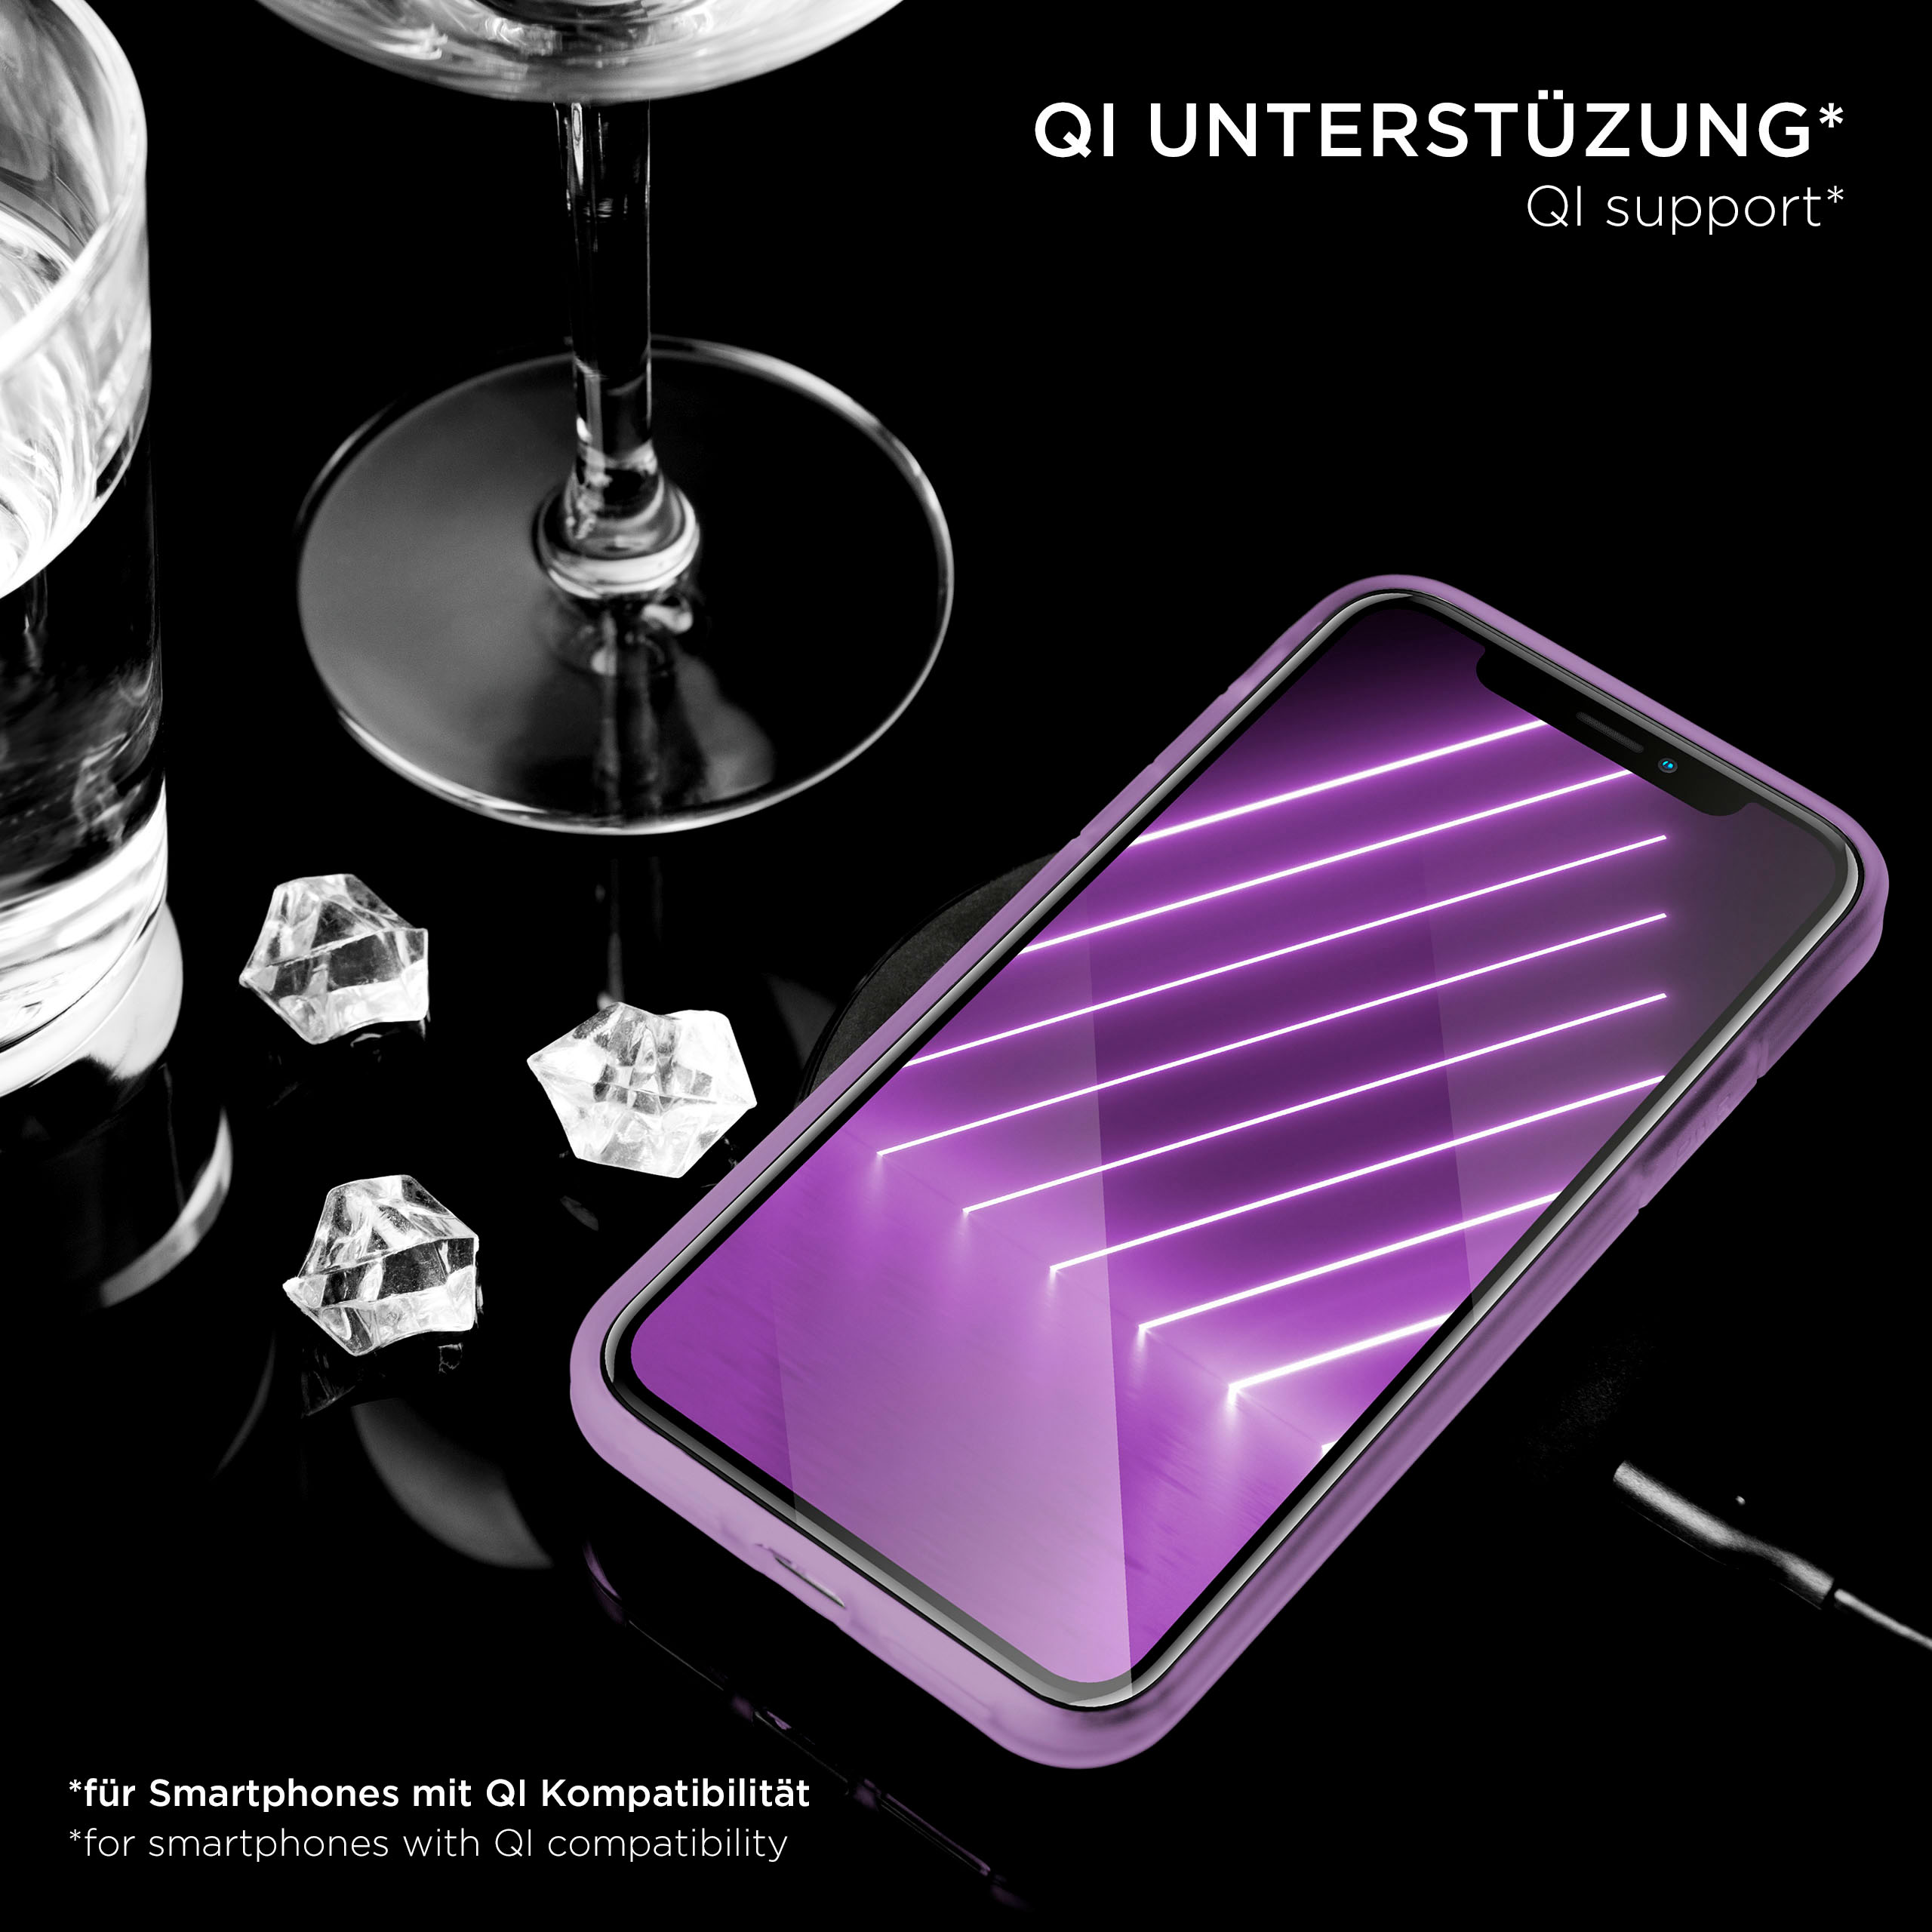 7 8 Violescent iPhone Apple, Case, iPhone Backcover, Plus, Plus / ONEFLOW Clear